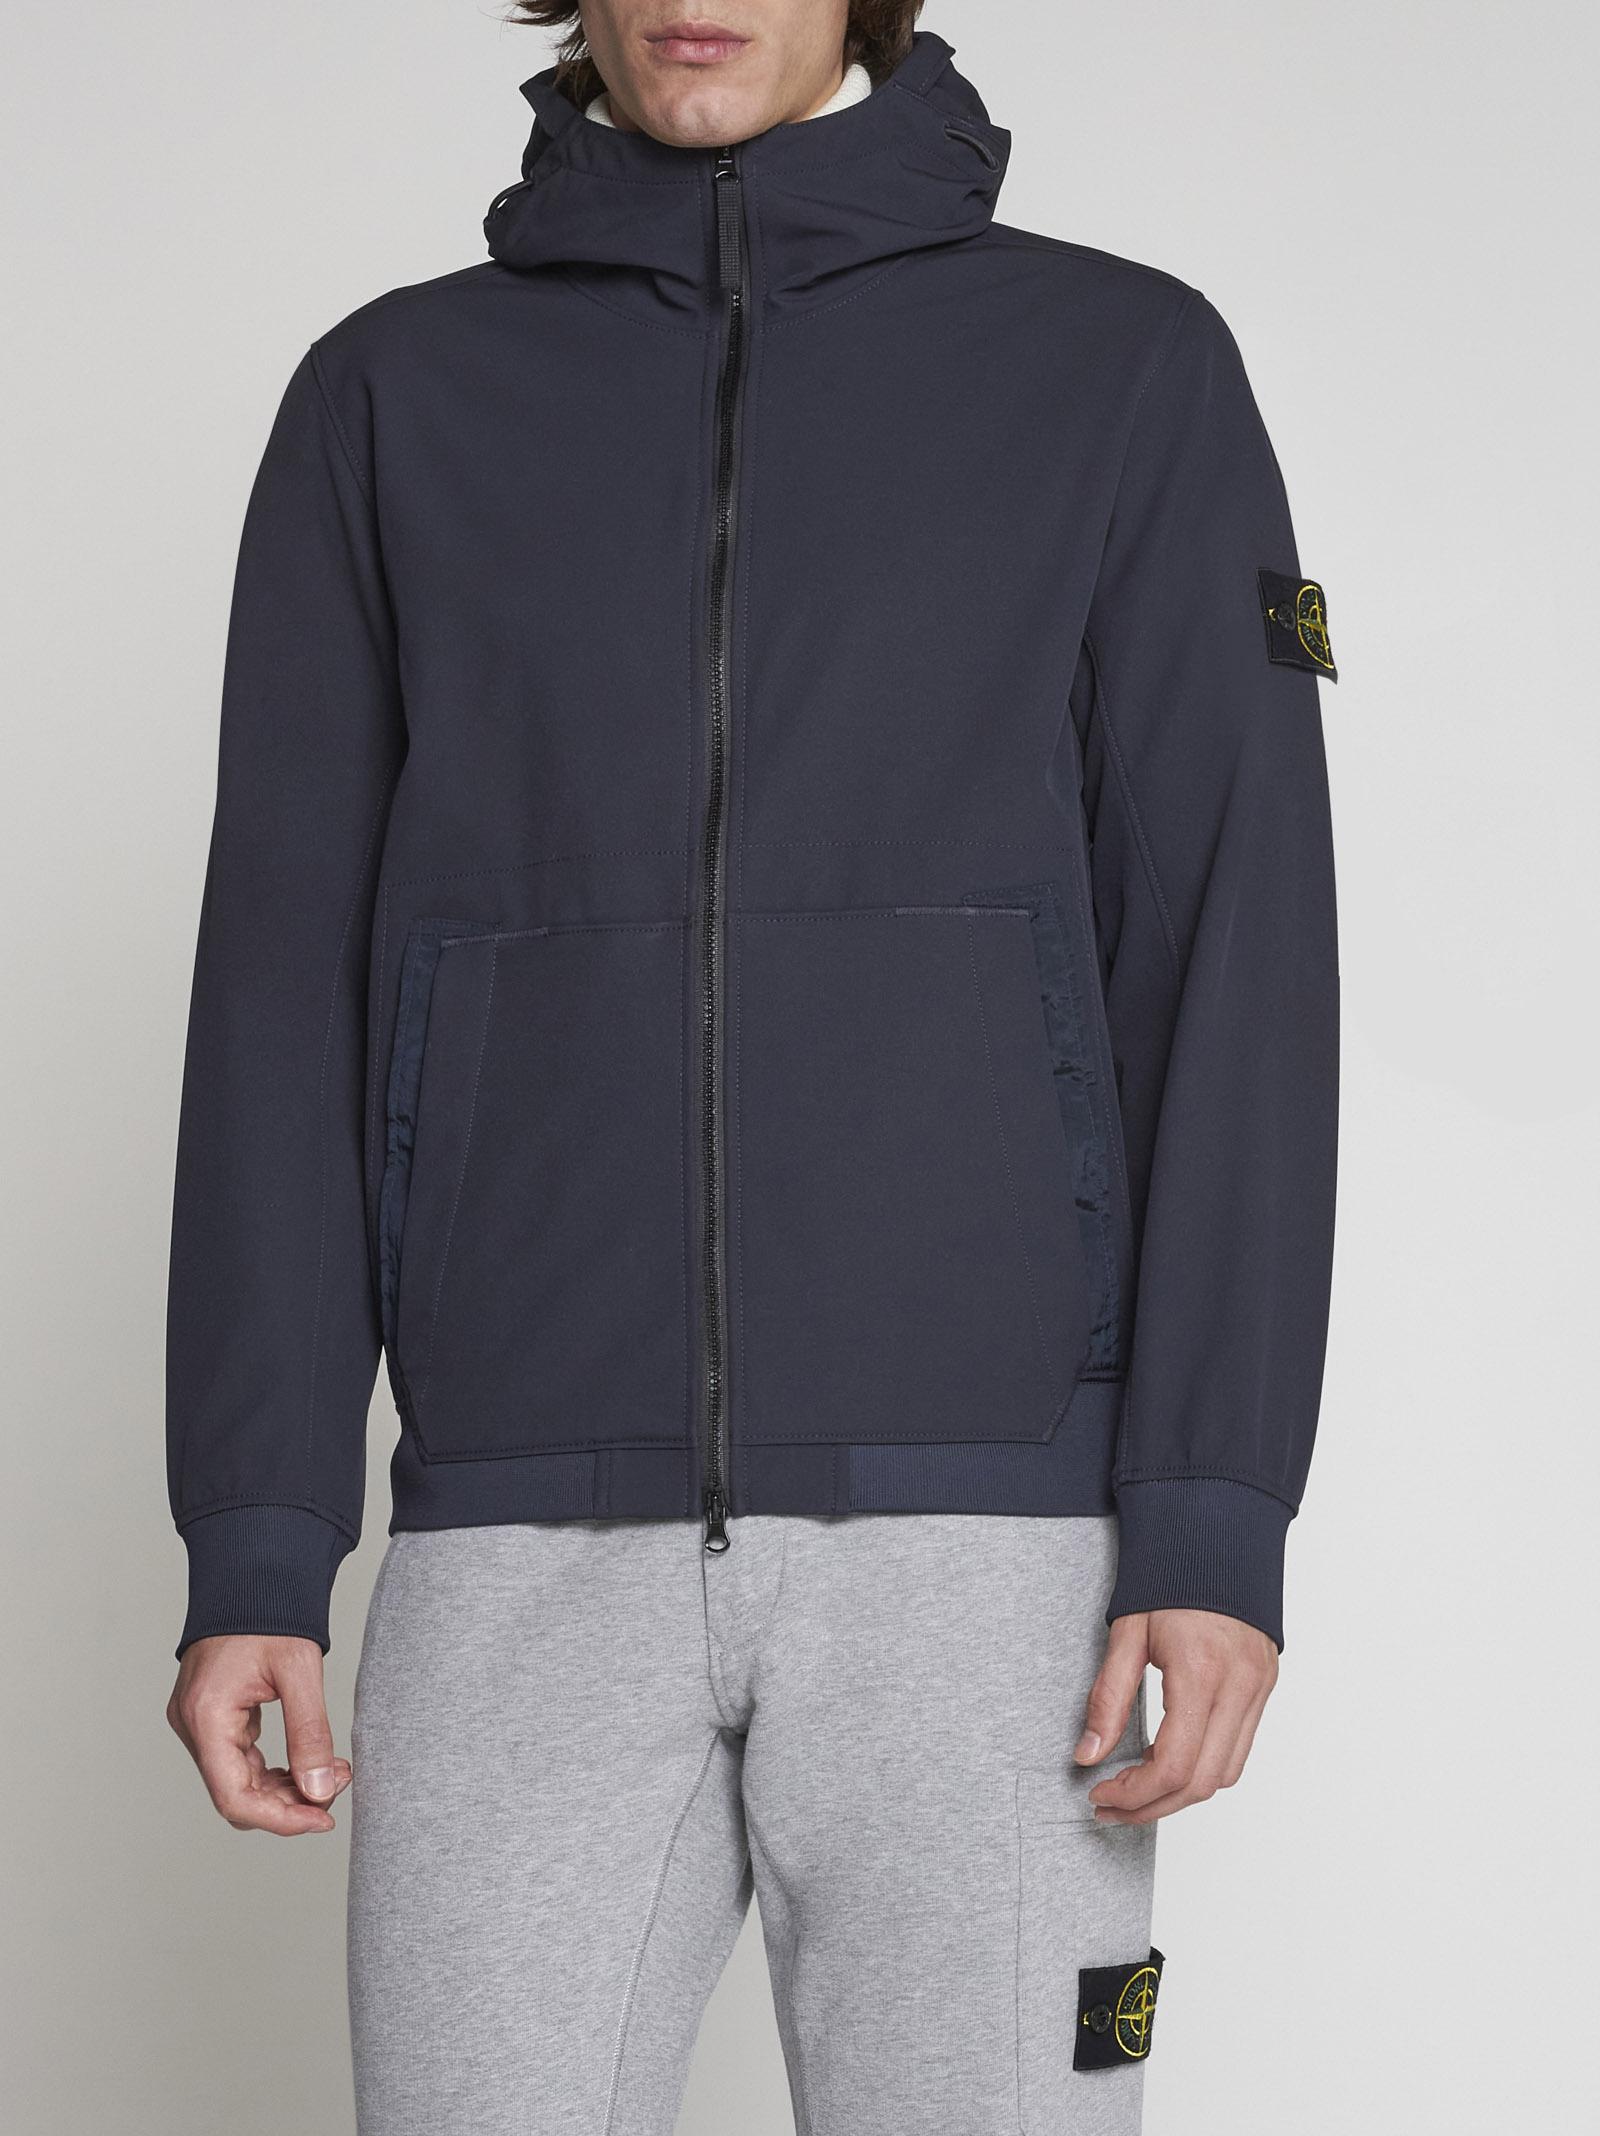 Stone Island Technical Fabric Hooded Jacket in Blue for Men | Lyst